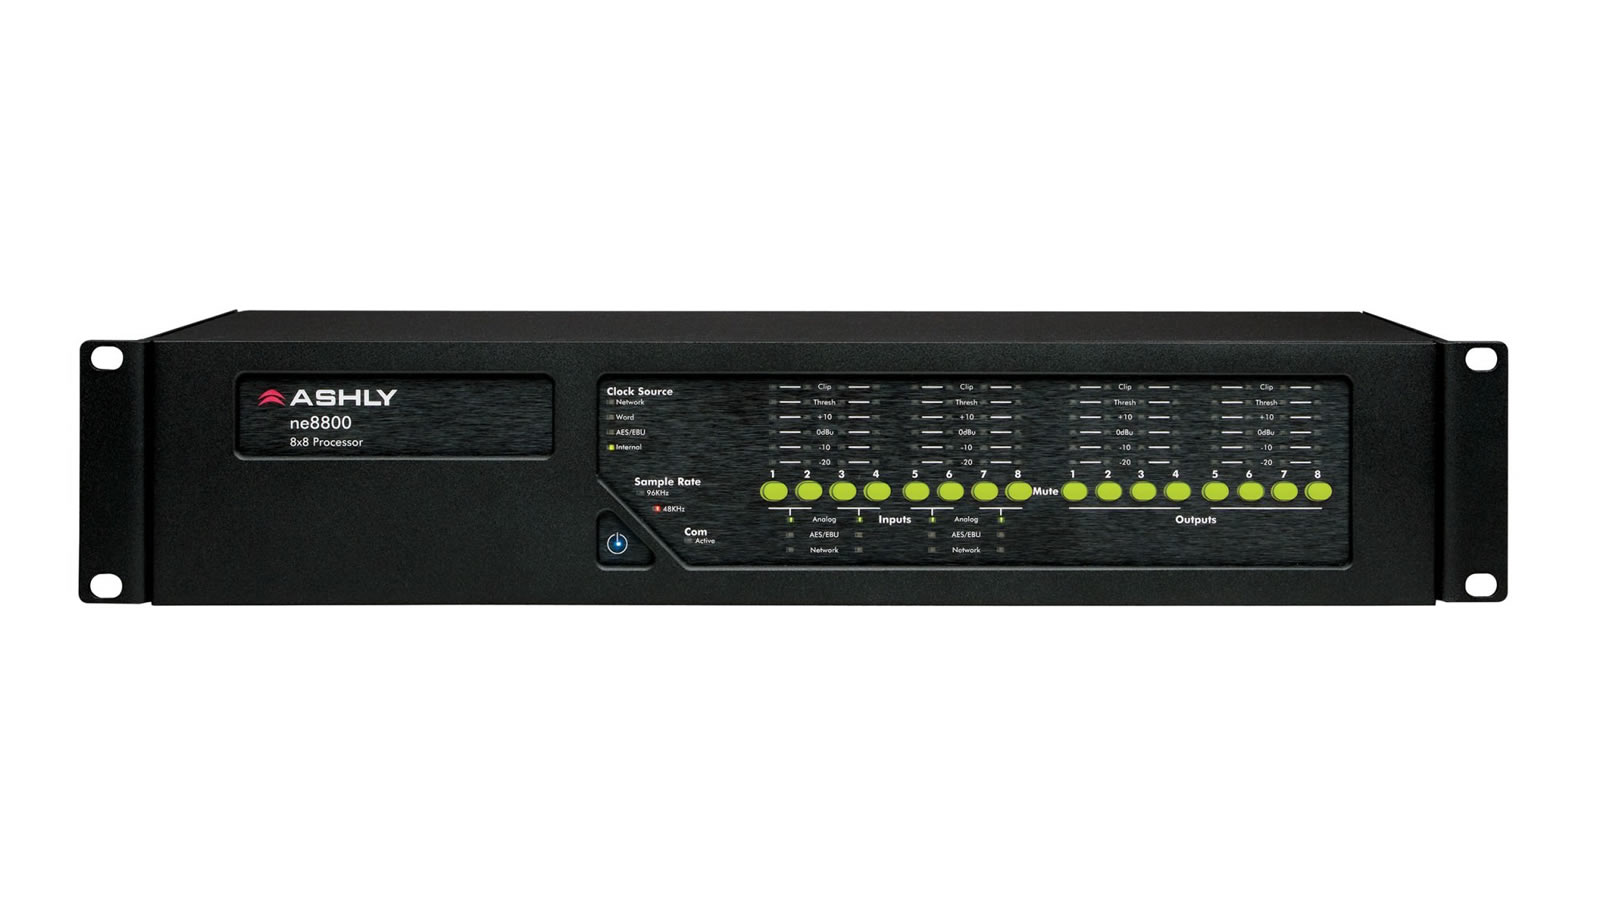 ne8800c Network-Enabled Protea DSP Audio System Processor 8-in x 8-out with CobraNet card by Ashly